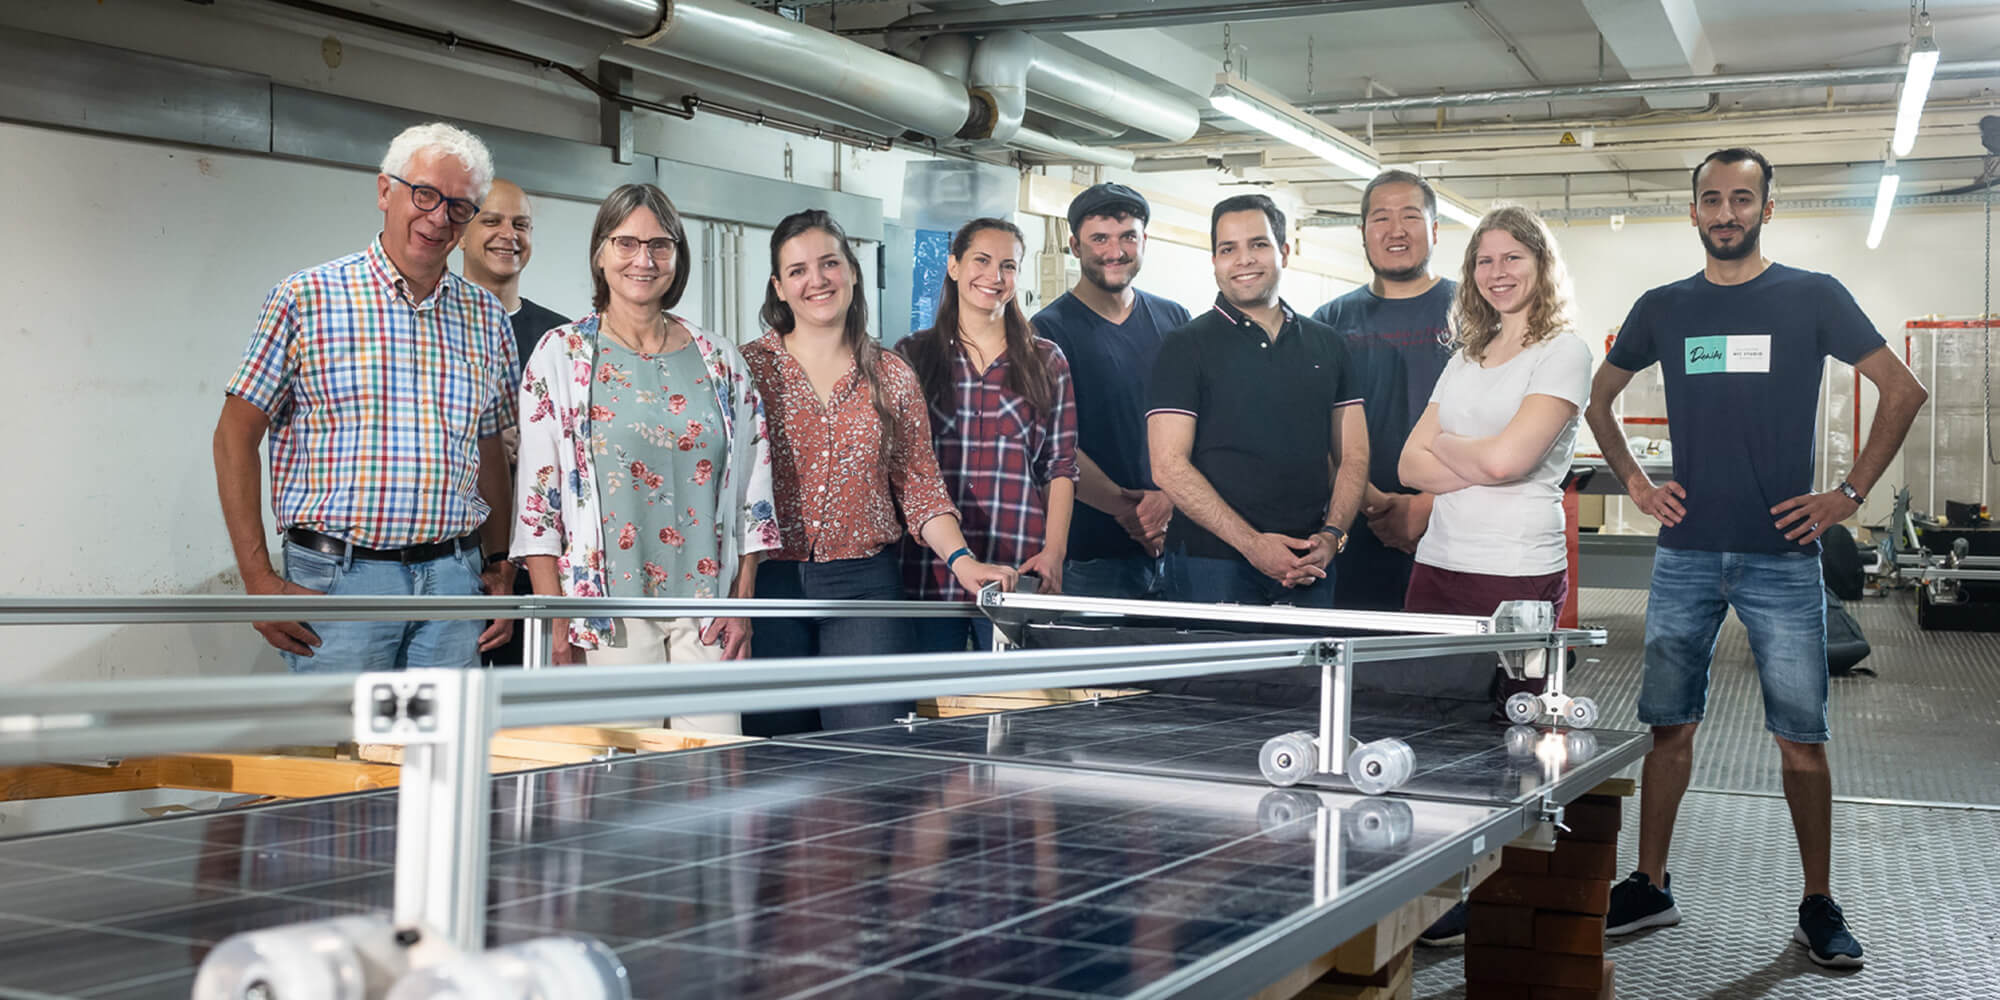 Innovative system for cleaning solar panels – Professor Usbeck, the project team and staff from Hamburg University of Applied Sciences